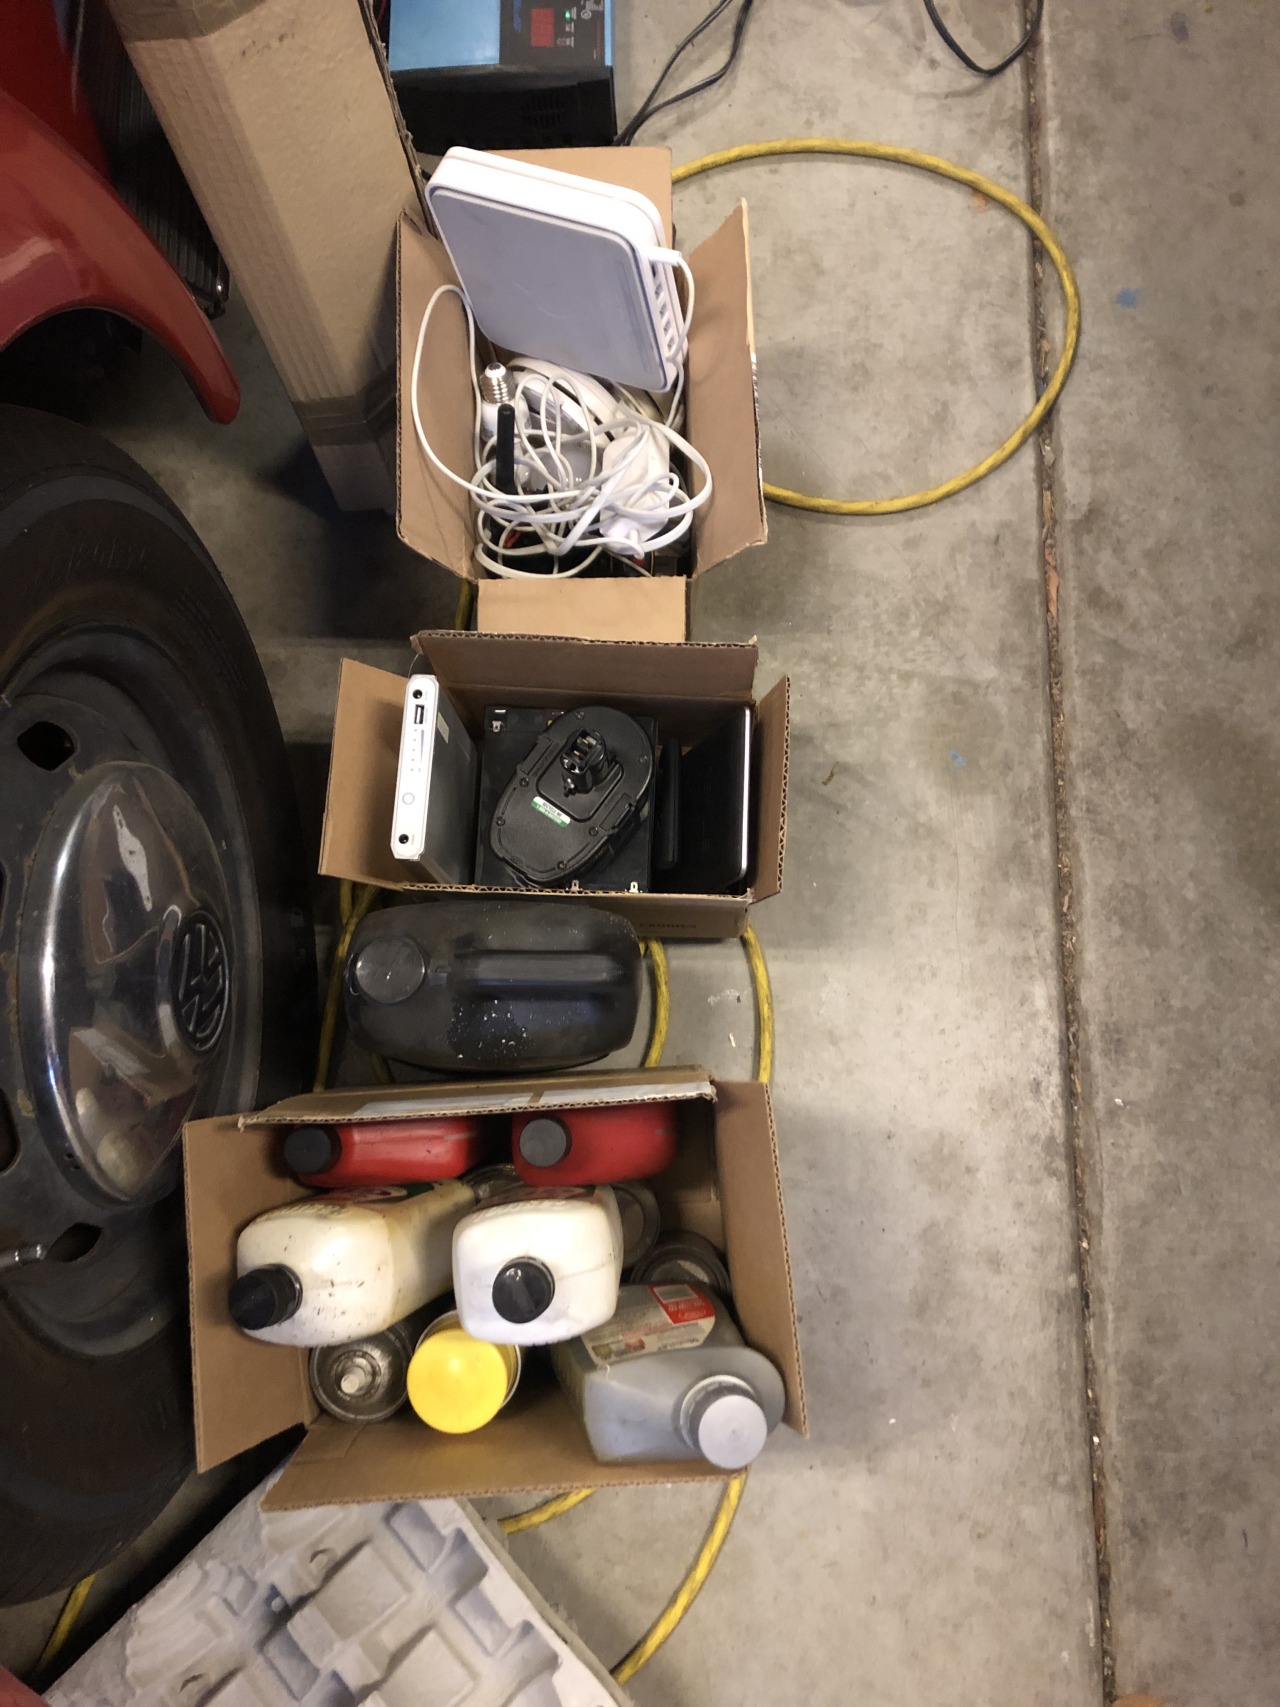 Day 3029 - Packed up and ready for our household hazardous waste drop-off appointment tomorrow. #dispose responsibly #household hazardous waste #everydaydeeds